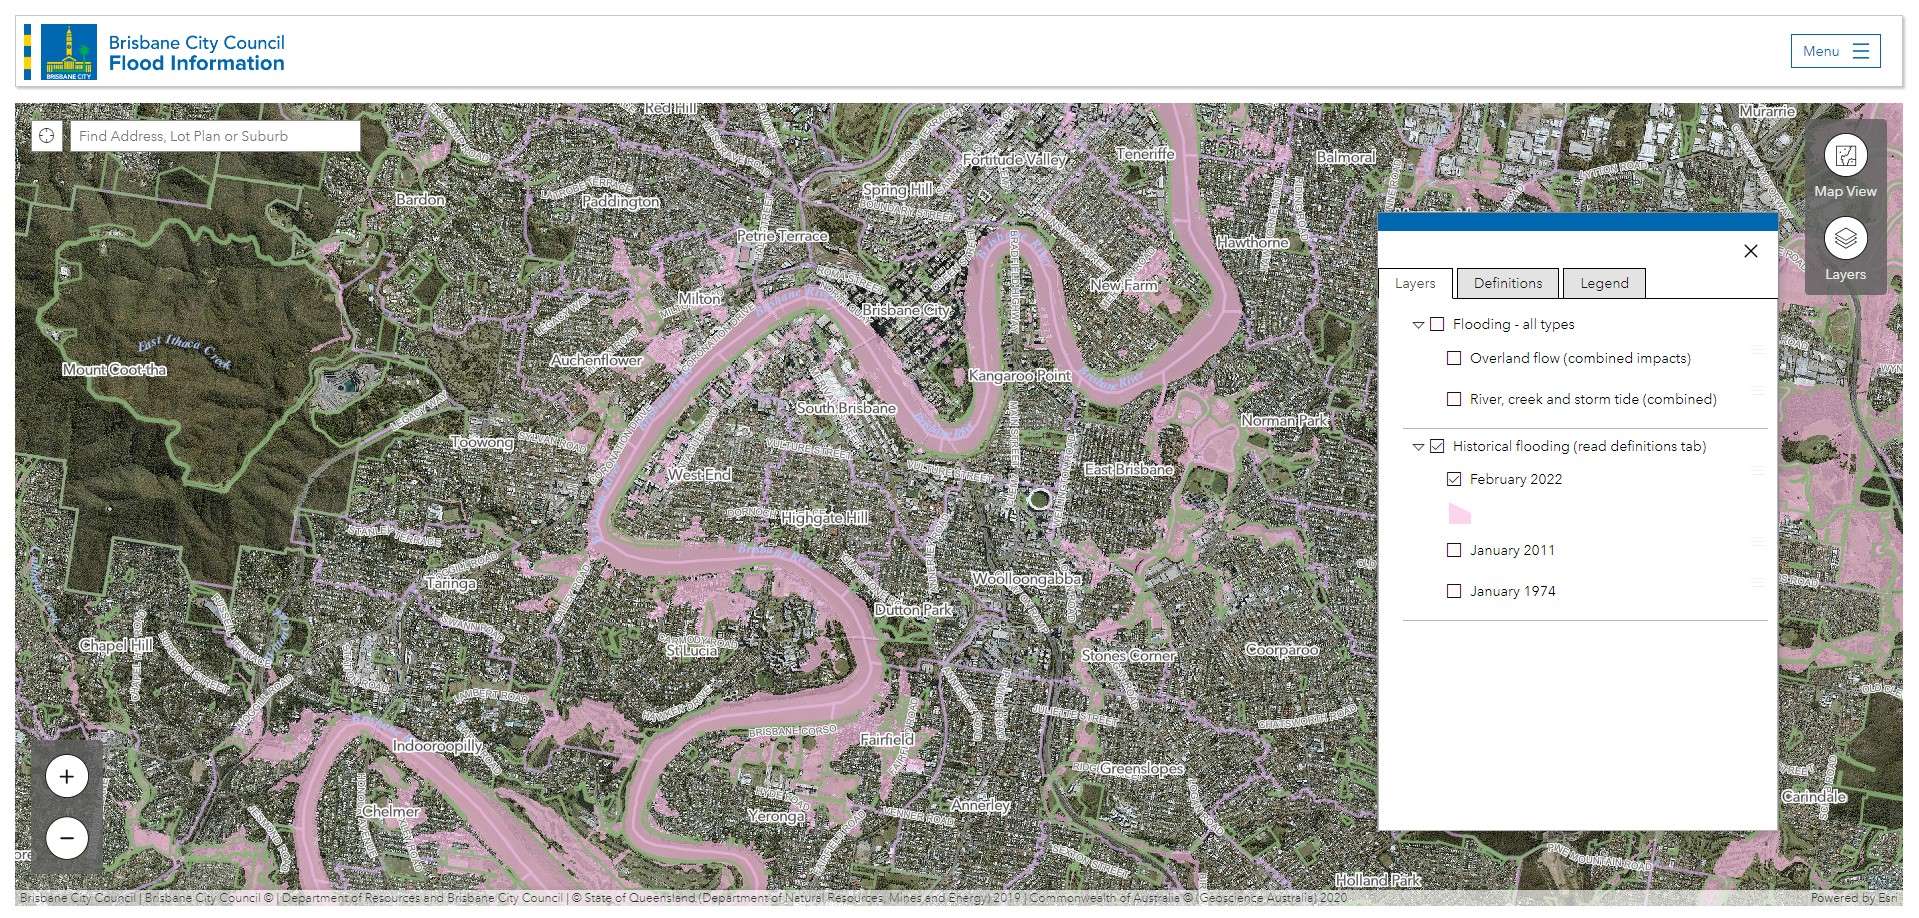 2022 Brisbane flood map covering Murarrie to Chapel Hill, highlighting flooded areas in pink.